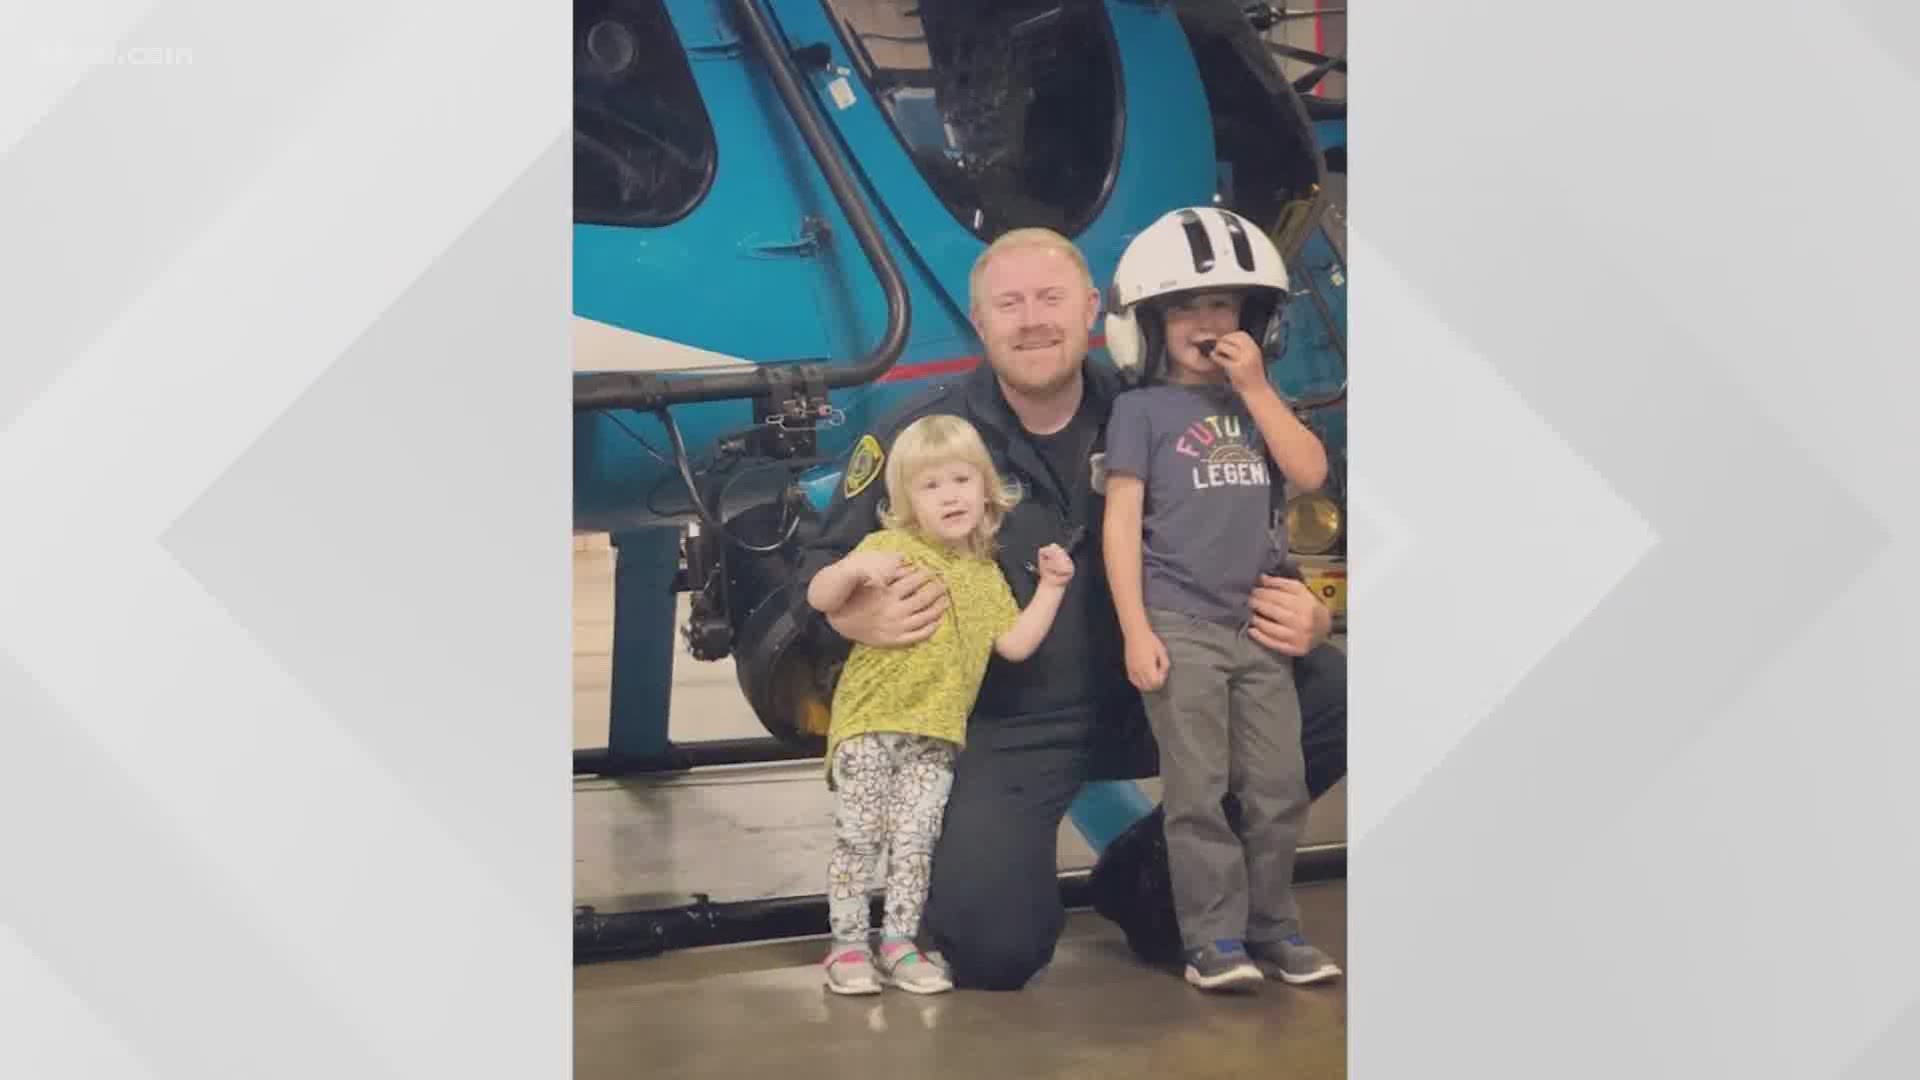 Officer Jason Knox, 35, is being remembered as an amazing officer, a devoted husband and loving father of two children.